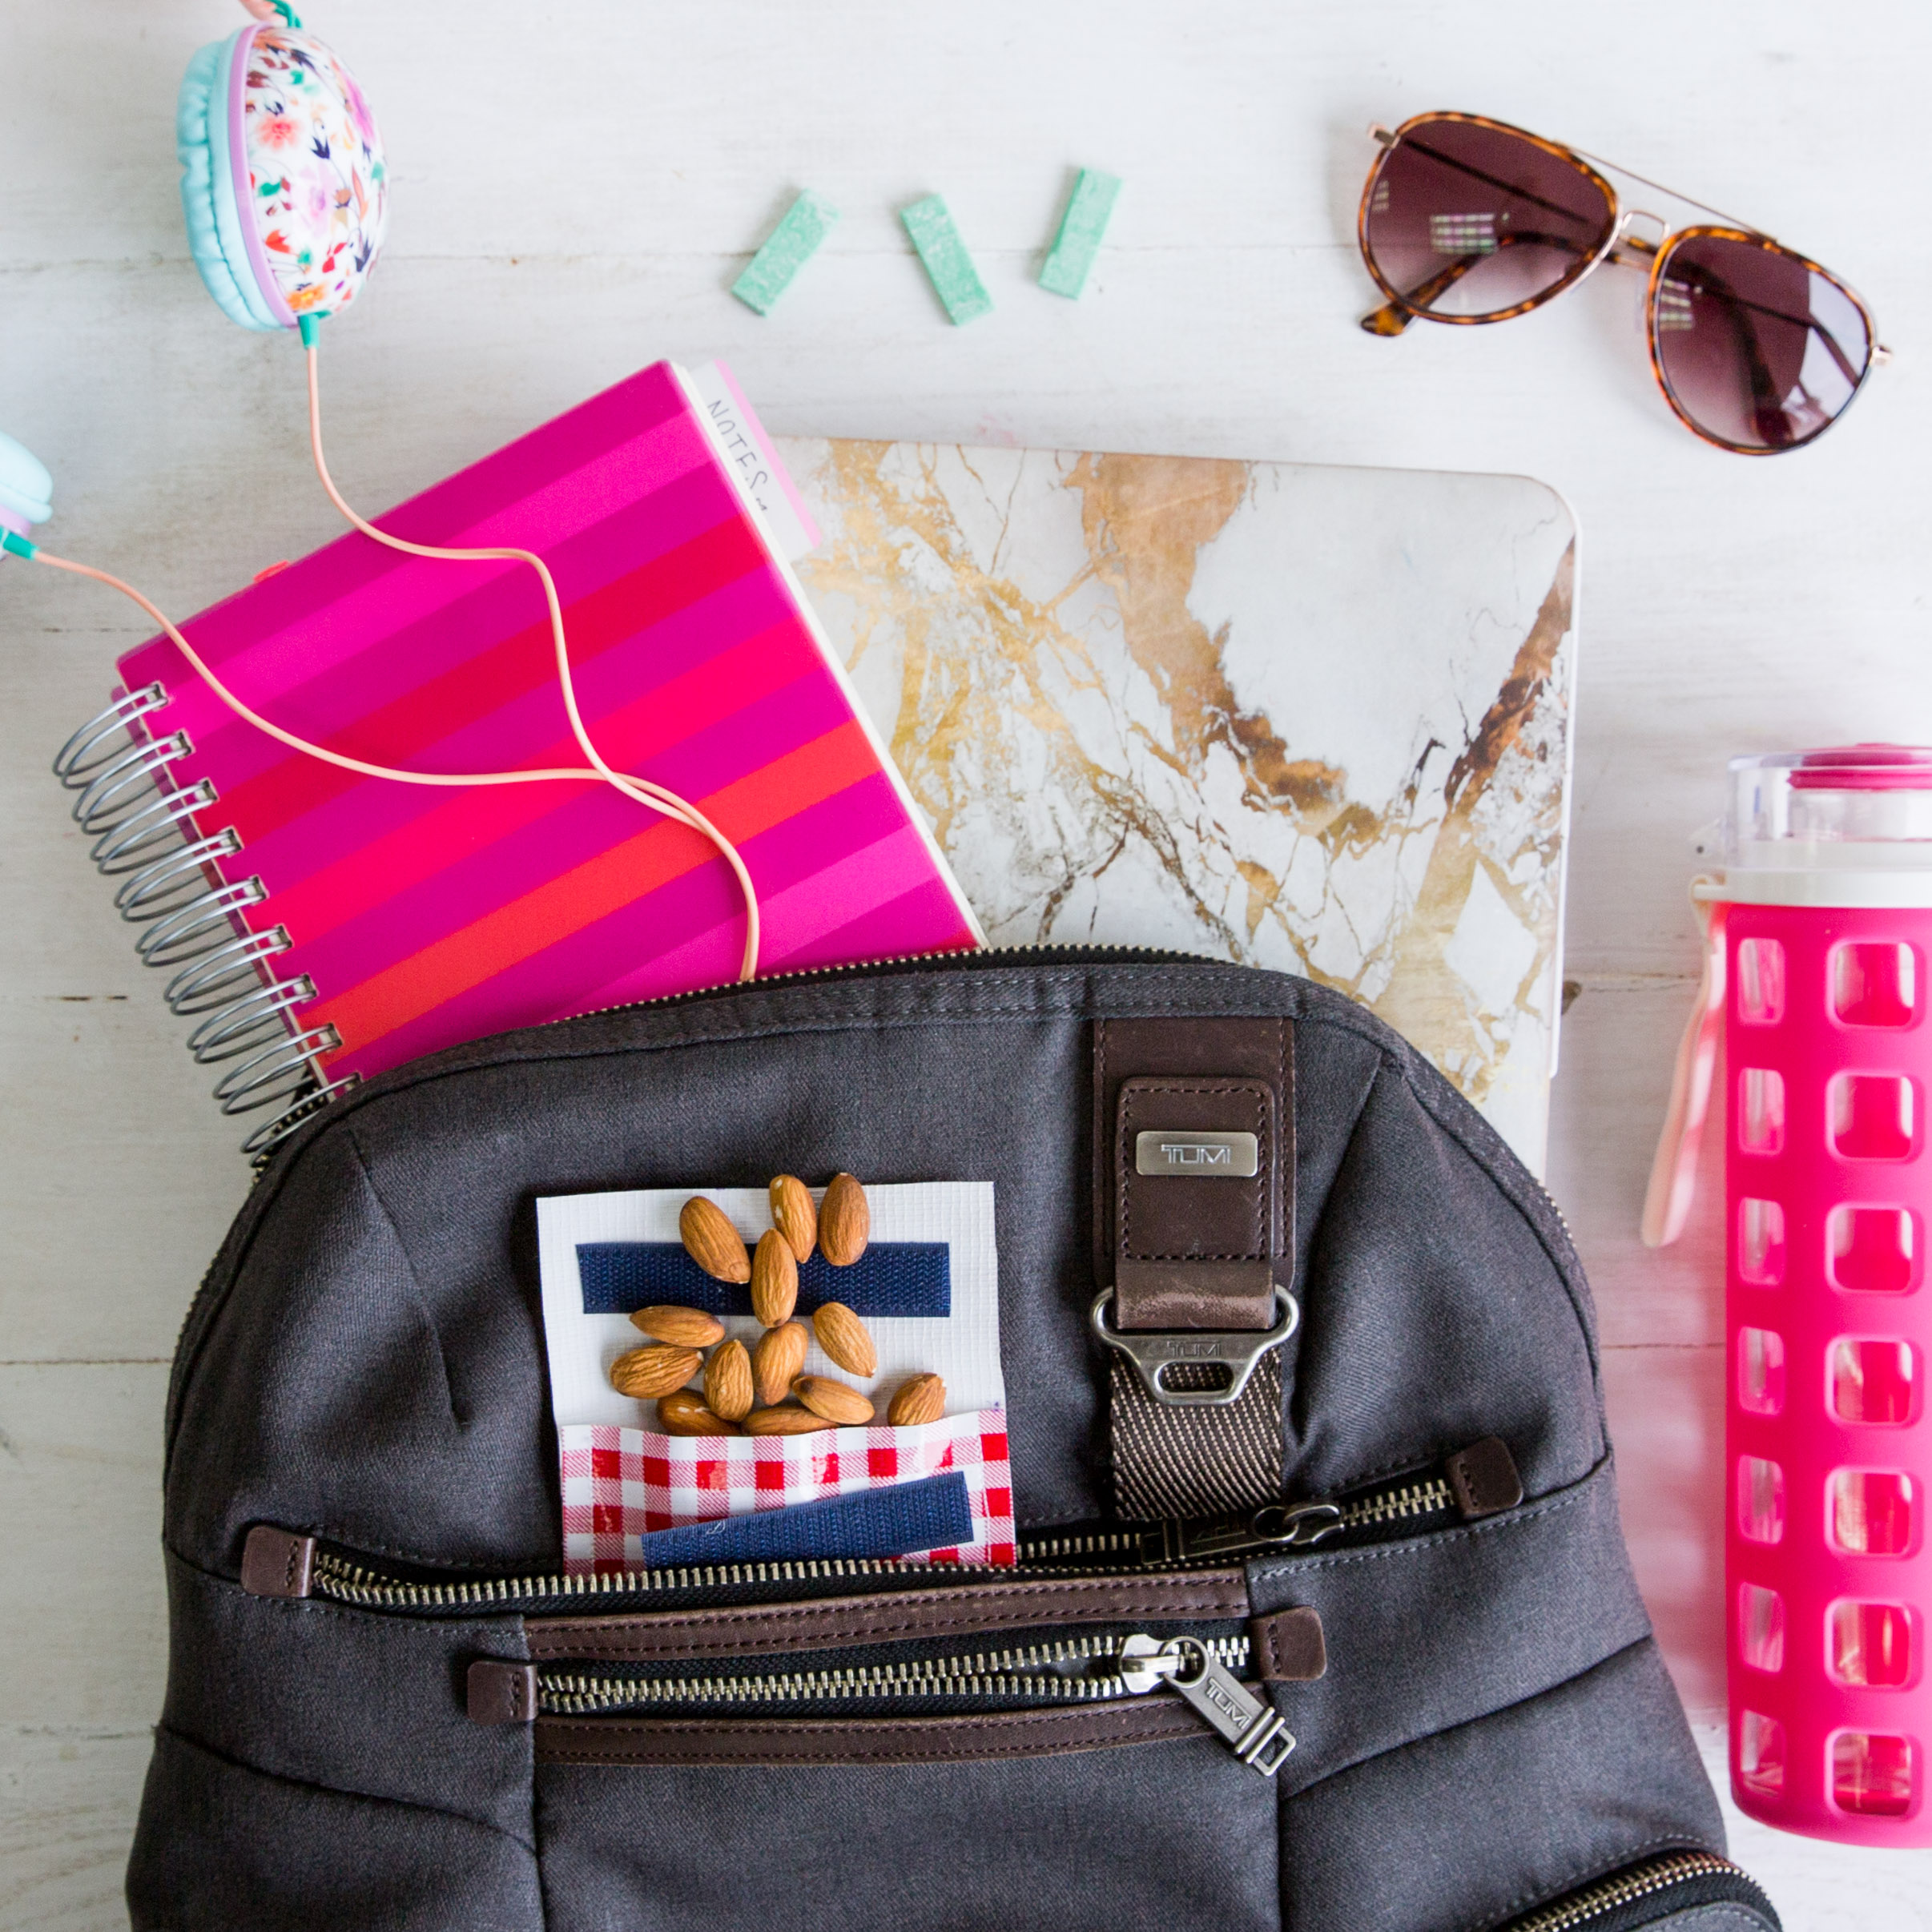 7 Things Every Mom Should Have In Her Bag